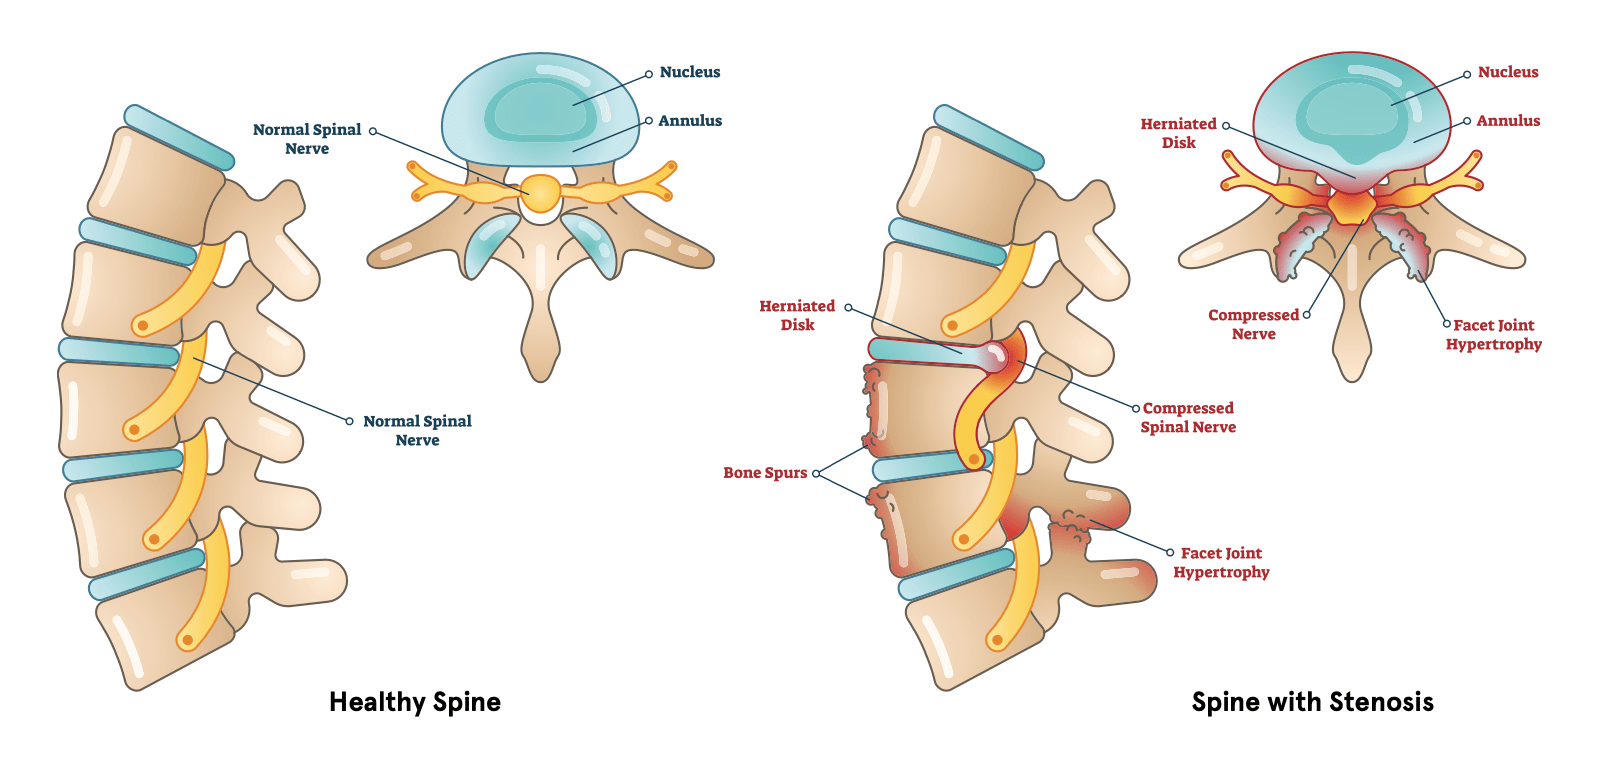 Spinal Stenosis: Definition, Causes, Symptoms, Diagnosis, and